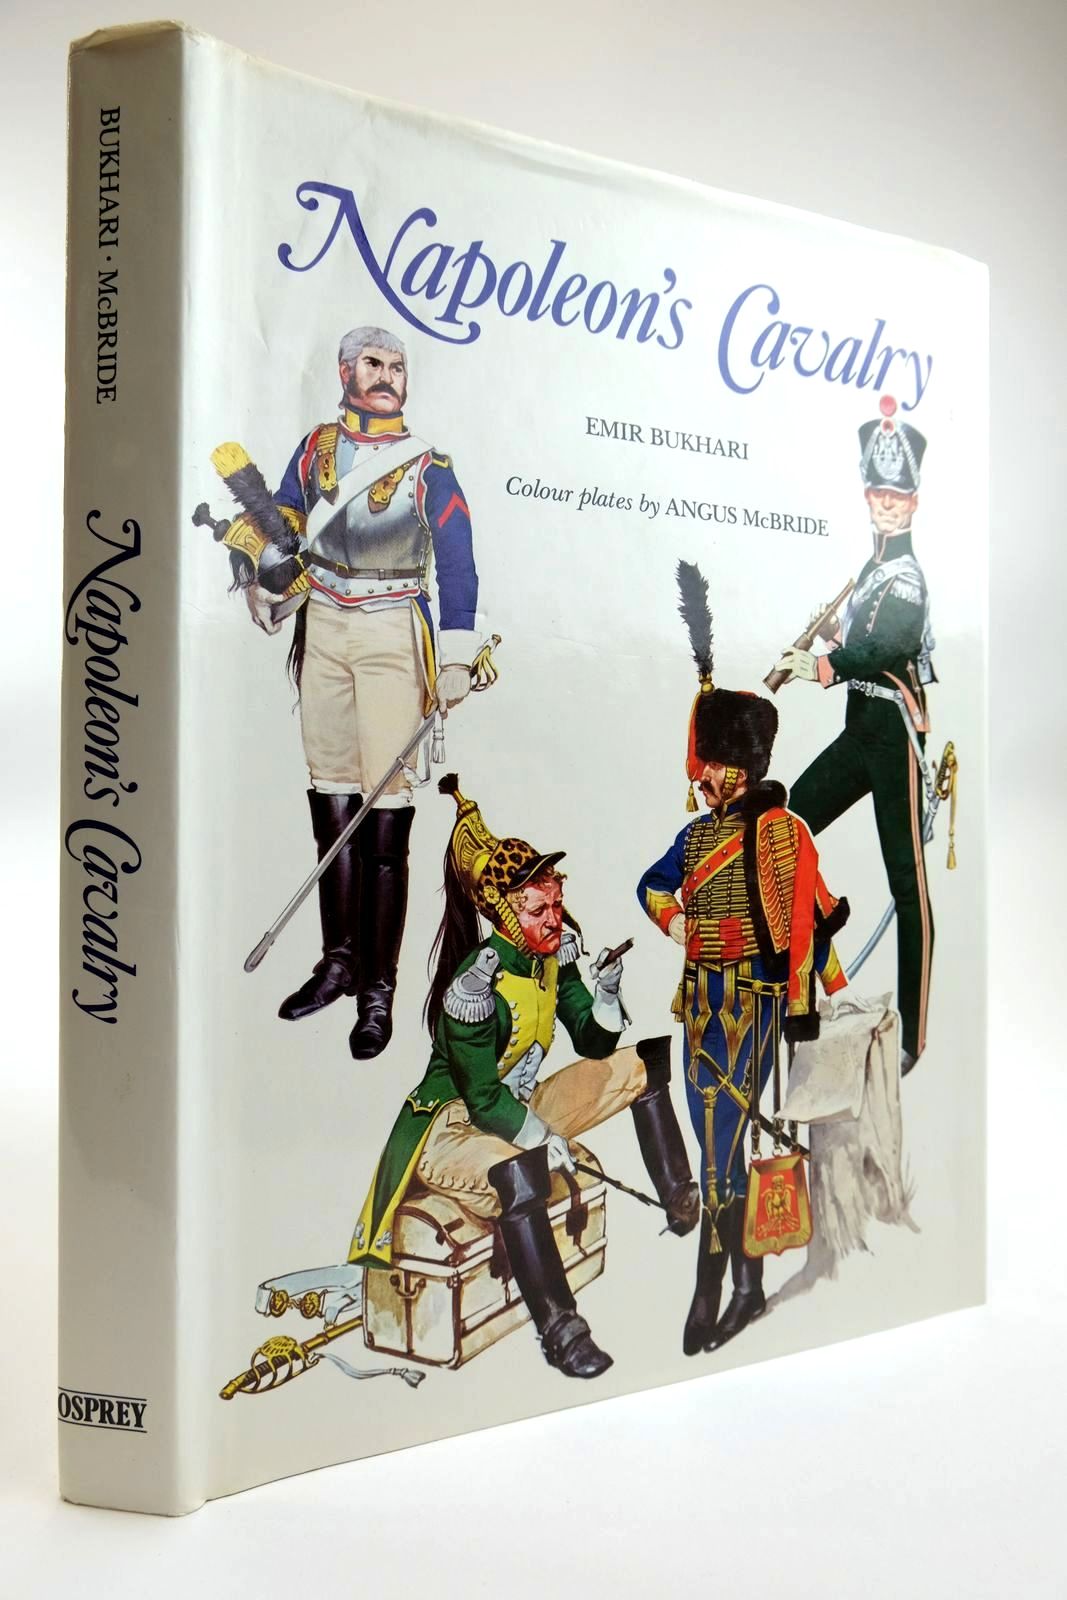 Photo of NAPOLEON'S CAVALRY written by Burkhari, Emir illustrated by McBride, Angus published by Osprey Publishing (STOCK CODE: 2133482)  for sale by Stella & Rose's Books